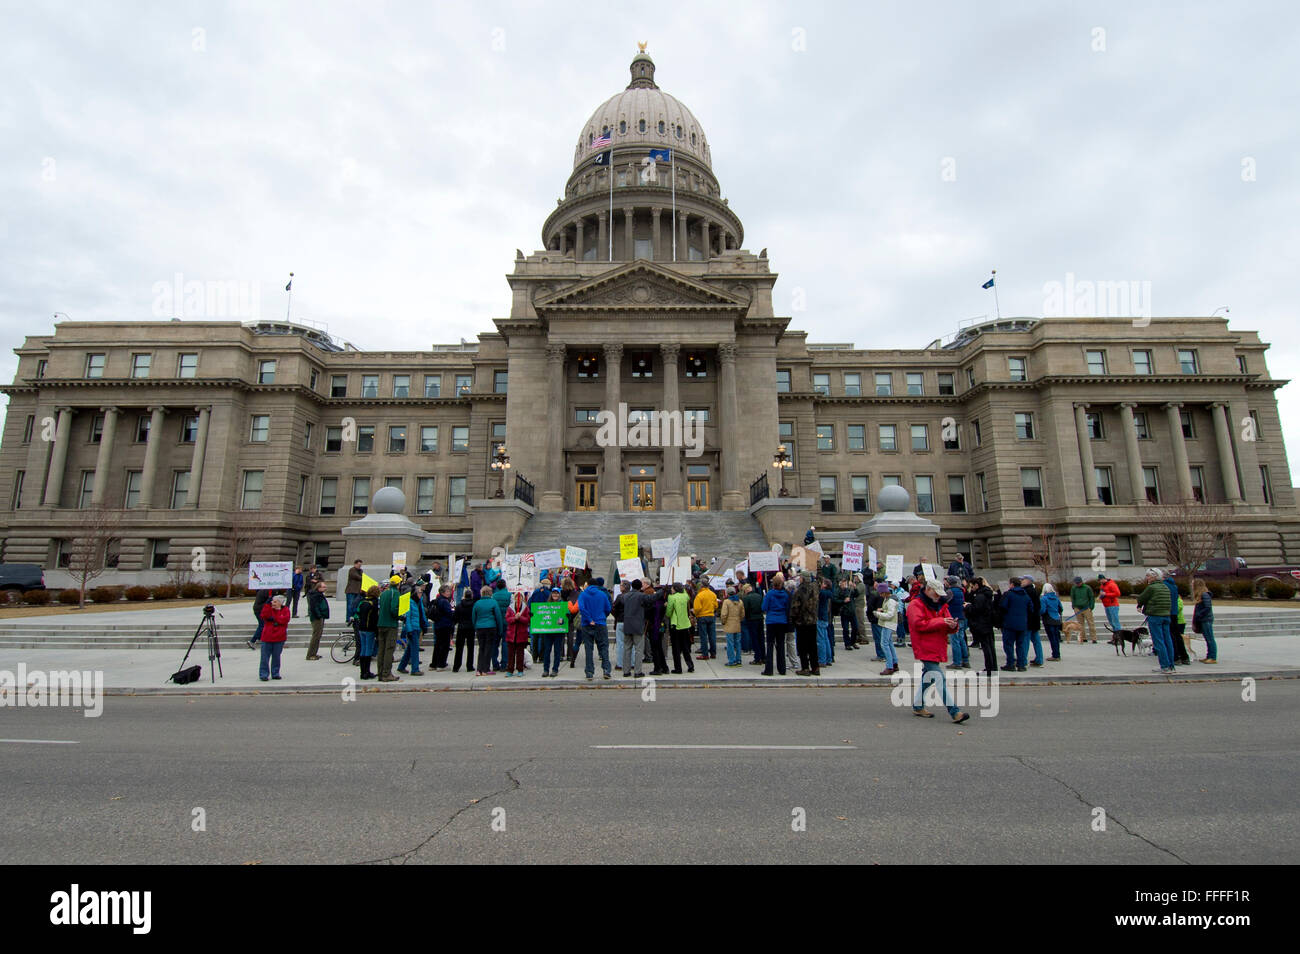 Pro-public lands rally in Boise ID, January 2016 Stock Photo